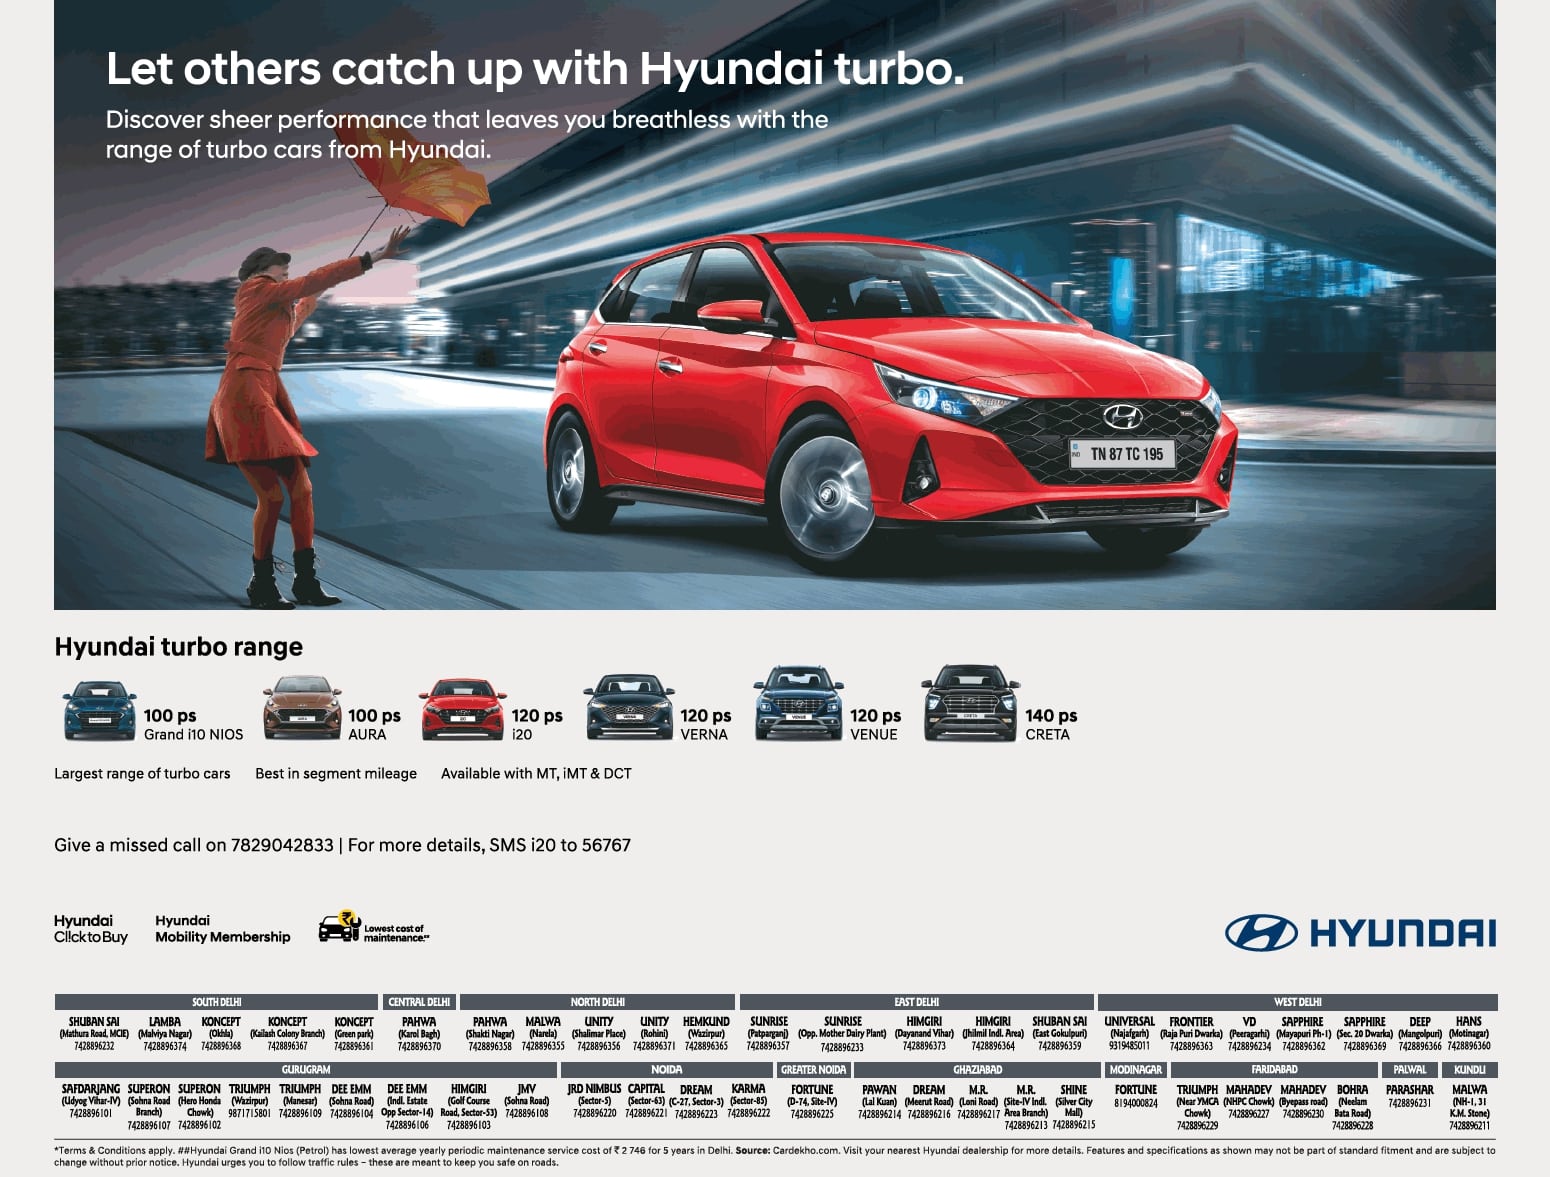 Hyundai Lets Others Catch Up With Hyundai Turbo Ad Advert Gallery